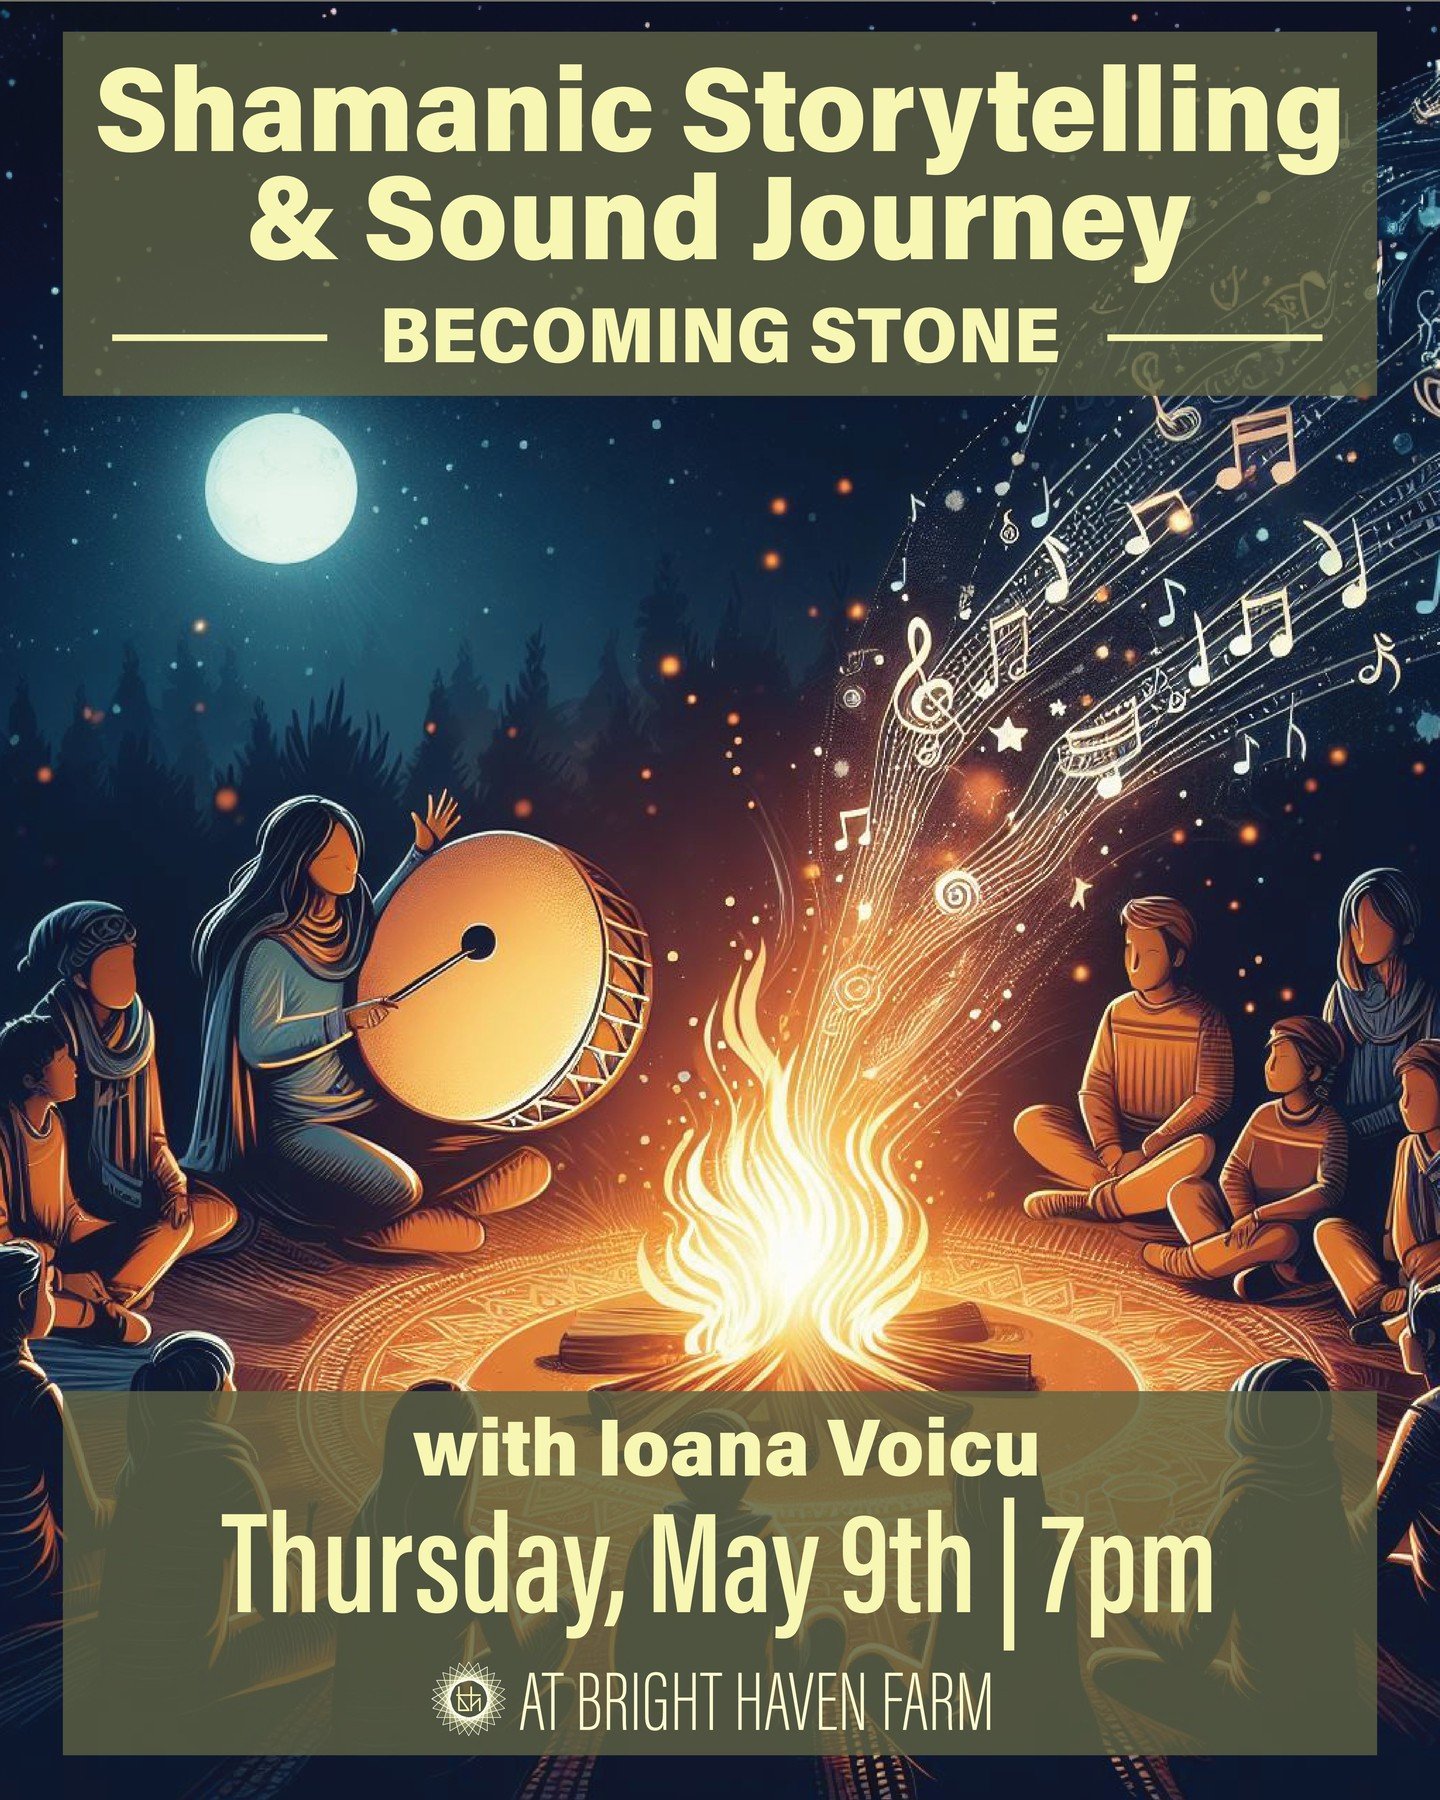 Shamanic Stories are full of magic with a core of alchemical potion! Born of and built upon real shamanic journeys, carried forward on frequencies of sound and rhythms, they act as a catalyst for inner healing and awakening. The listener follows alon